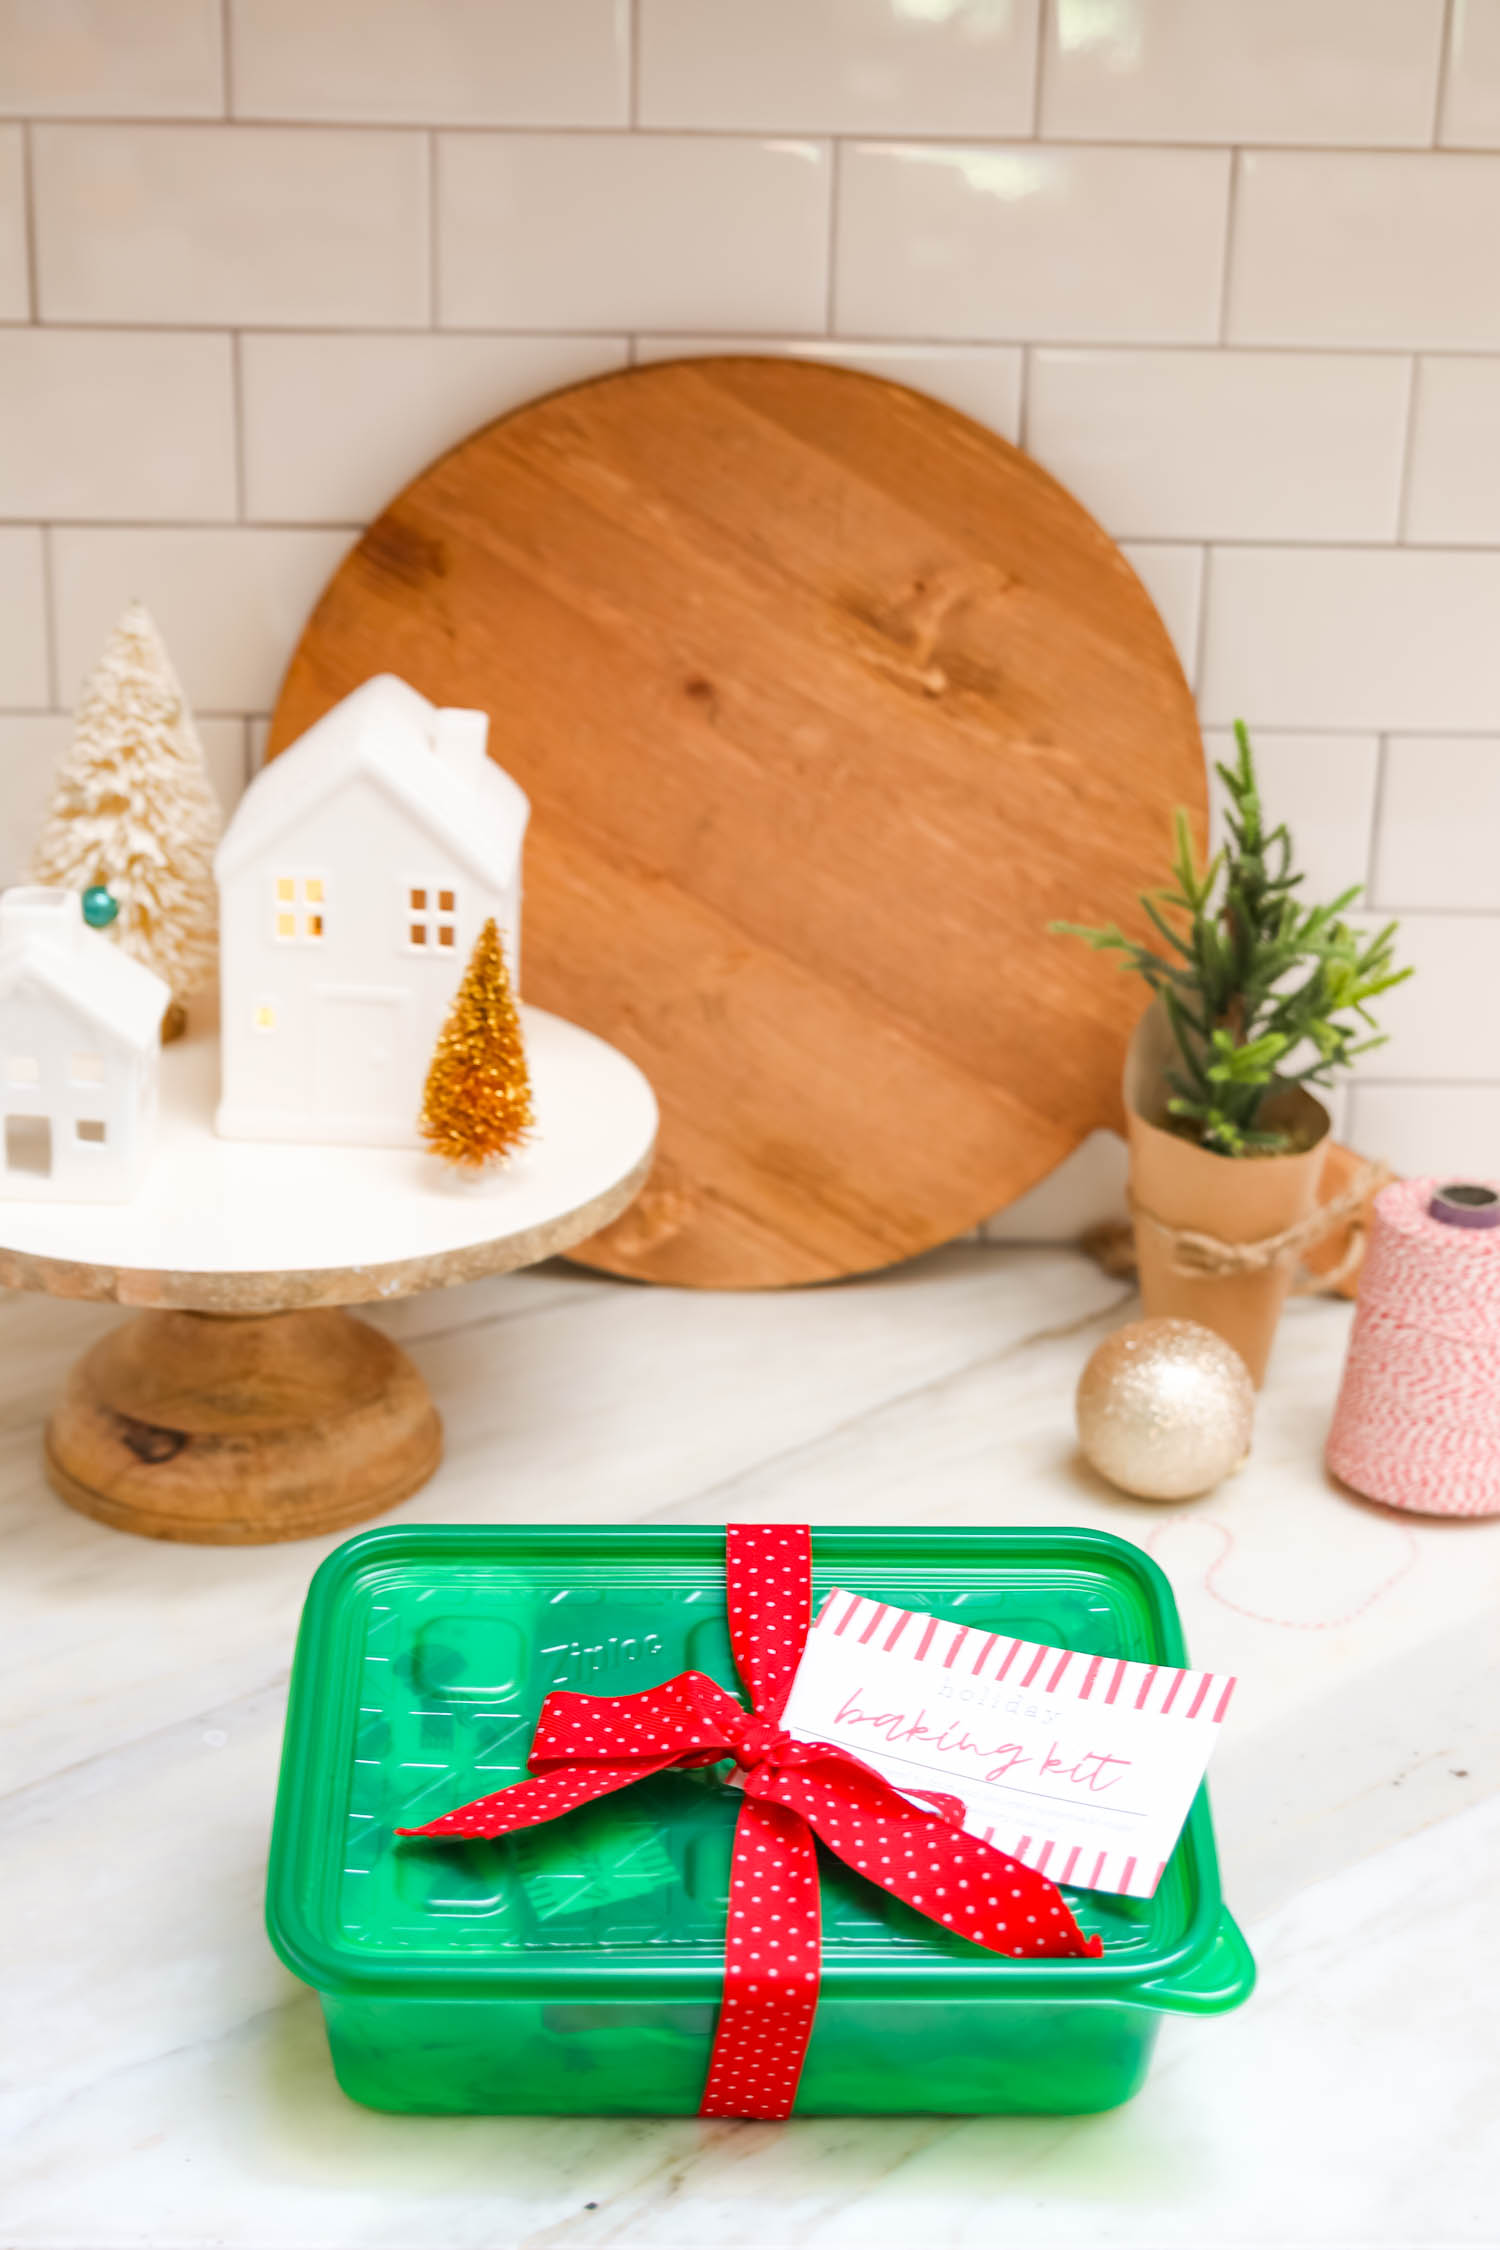 My Favorite DIY Homemade Hostess Gift Ideas - Home with Holliday